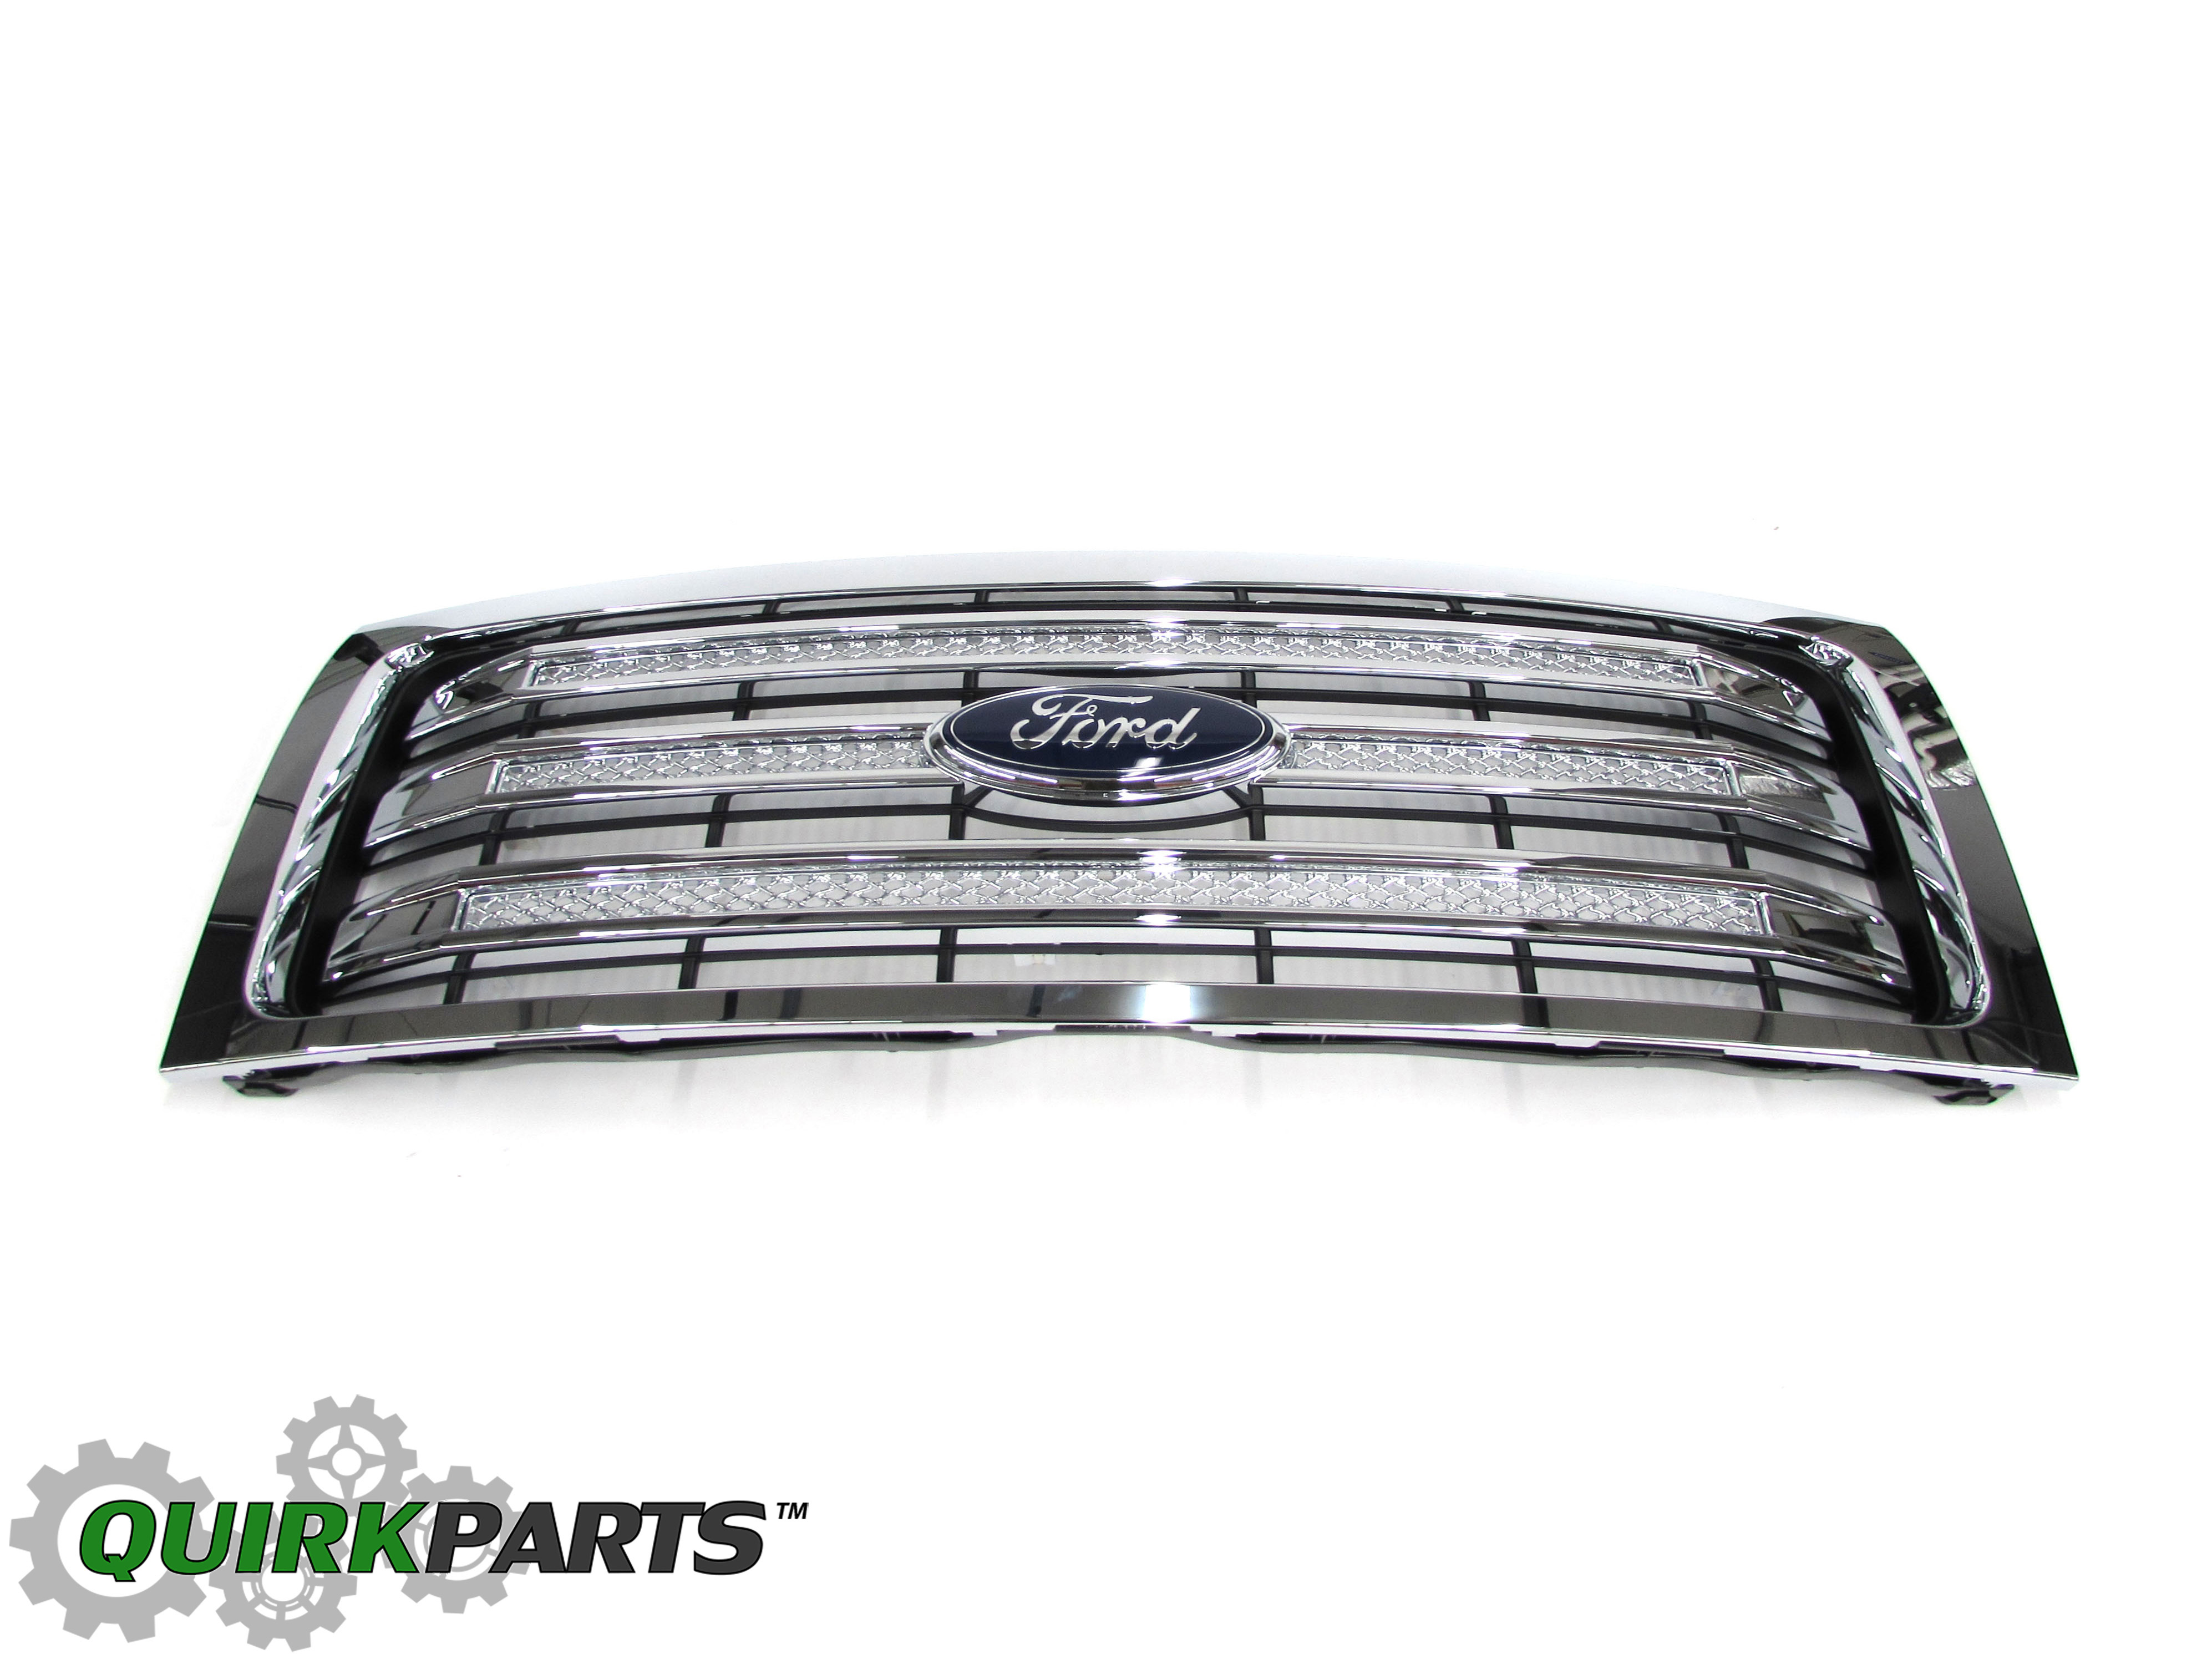 Ford galaxy chrome radiator grille #5